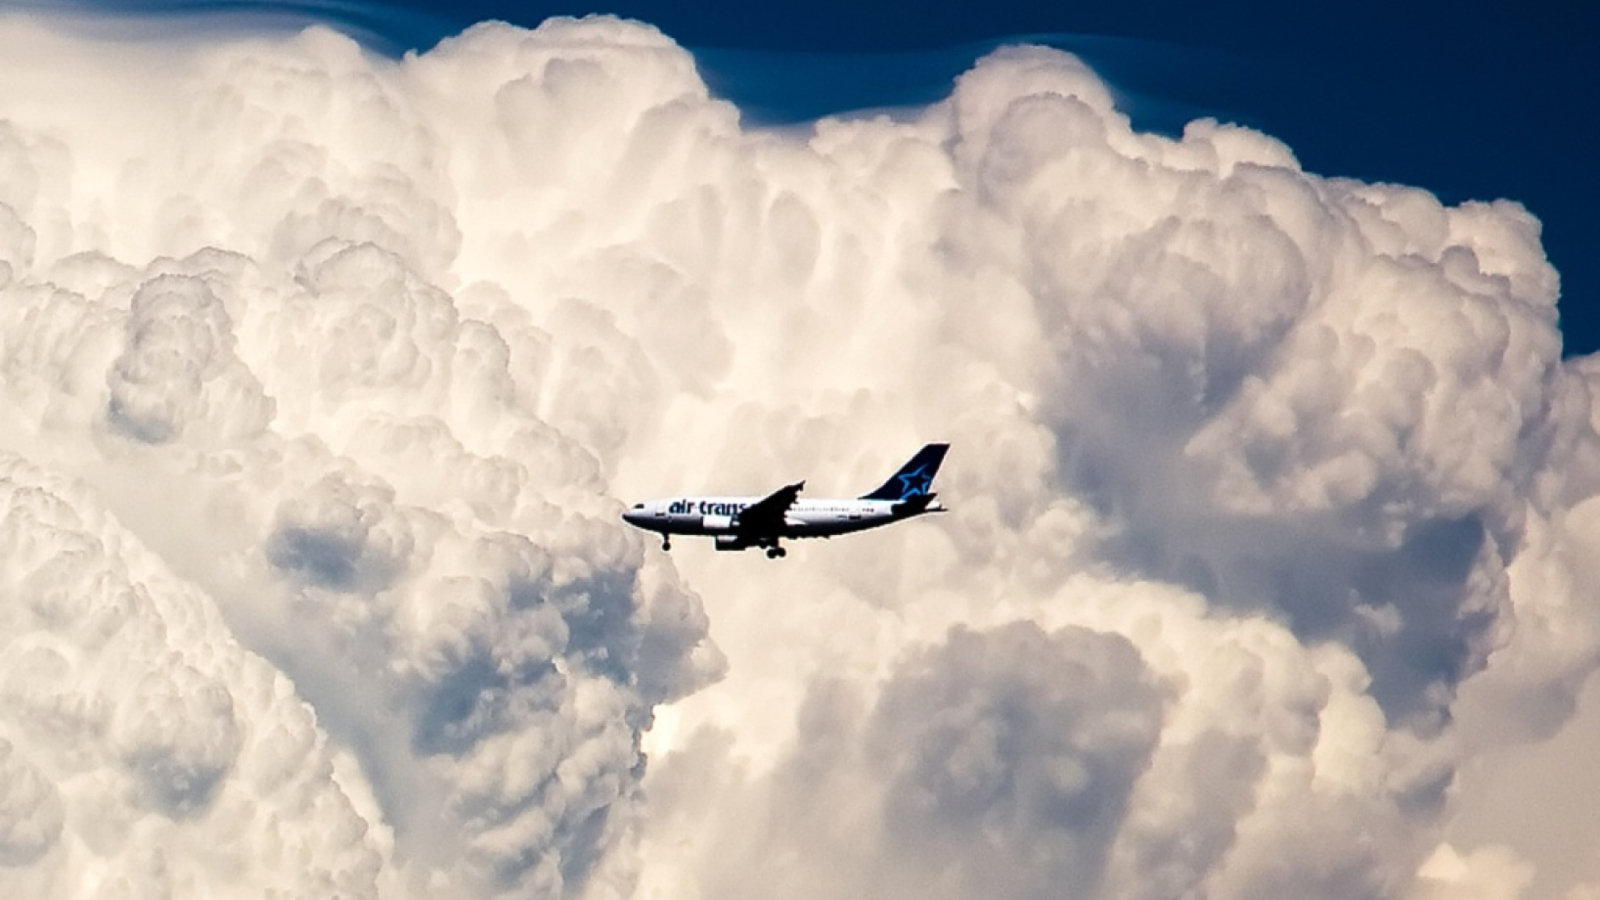 Plane In The Clouds wallpaper 1600x900